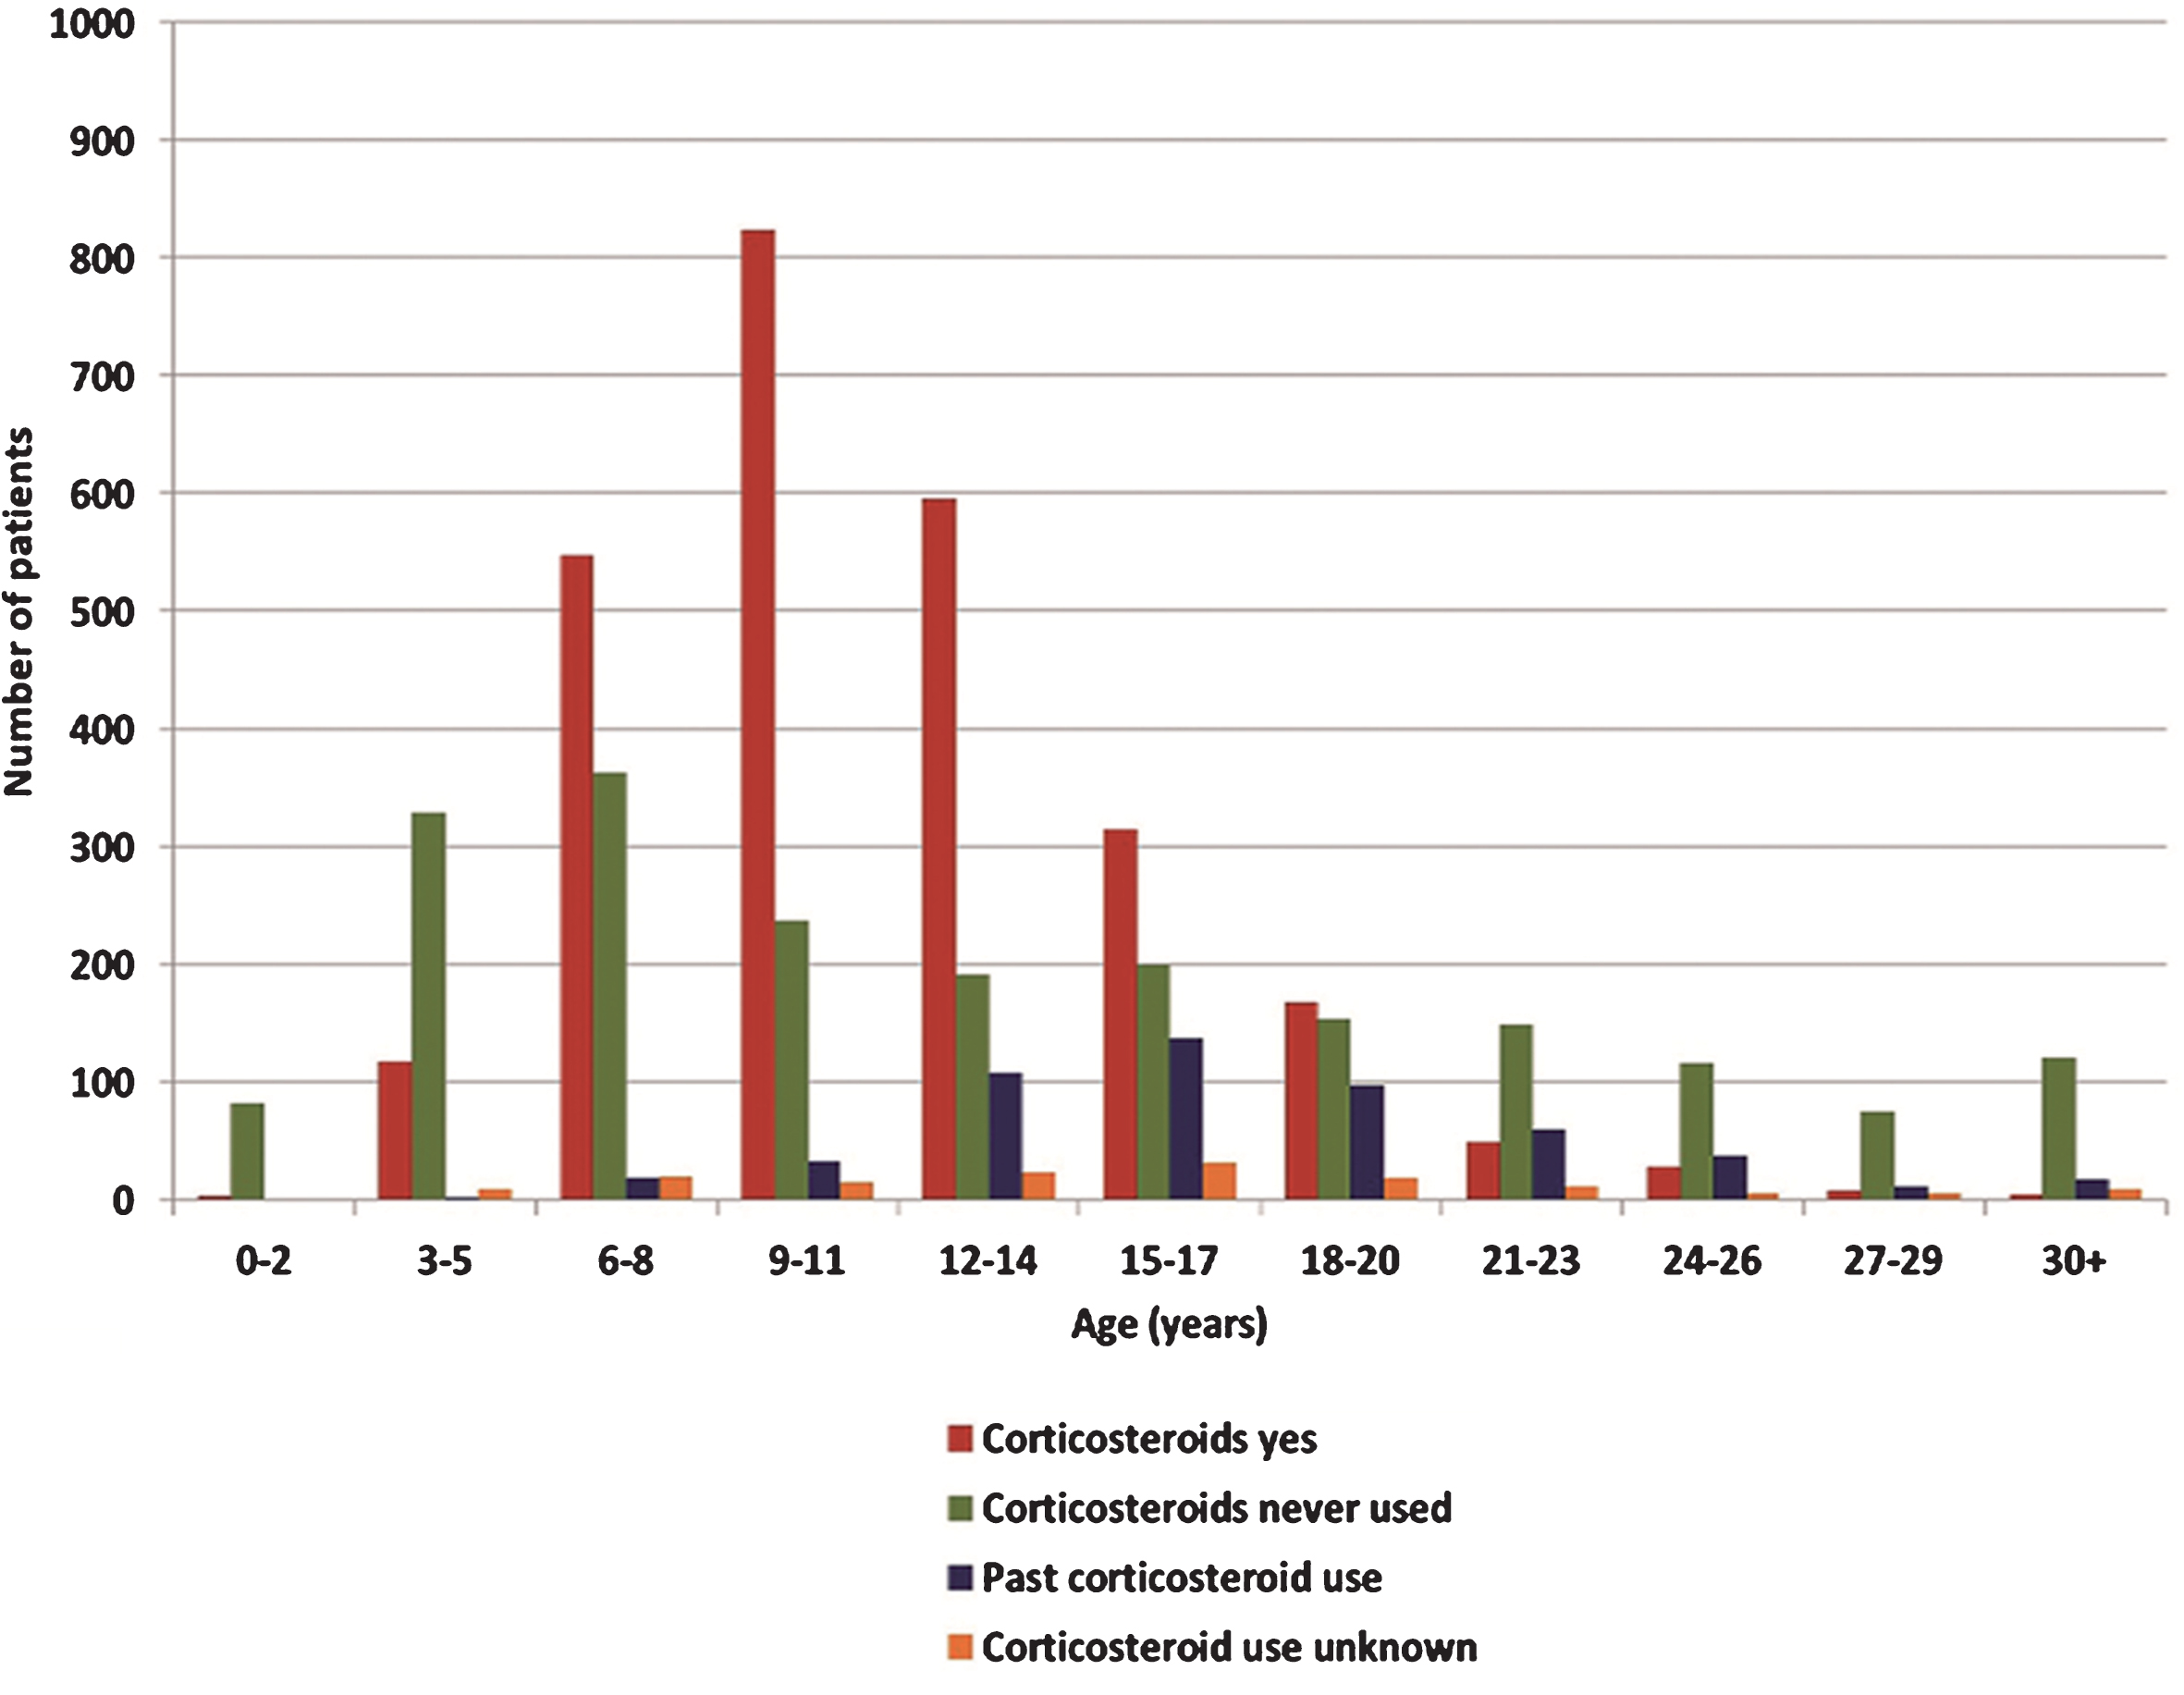 Overview of corticosteroid use within the global TREAT-NMD DMD database. Corticosteroid was reported as “corticosteroids yes” (current corticosteroid users/red bars), “corticosteroids never used ”(corticosteroids never used/green bars), “past corticosteroid use” (used corticosteroids in the past/blue bars) or “corticosteroid use unknown” (corticosteroid use unknown/orange bars”).